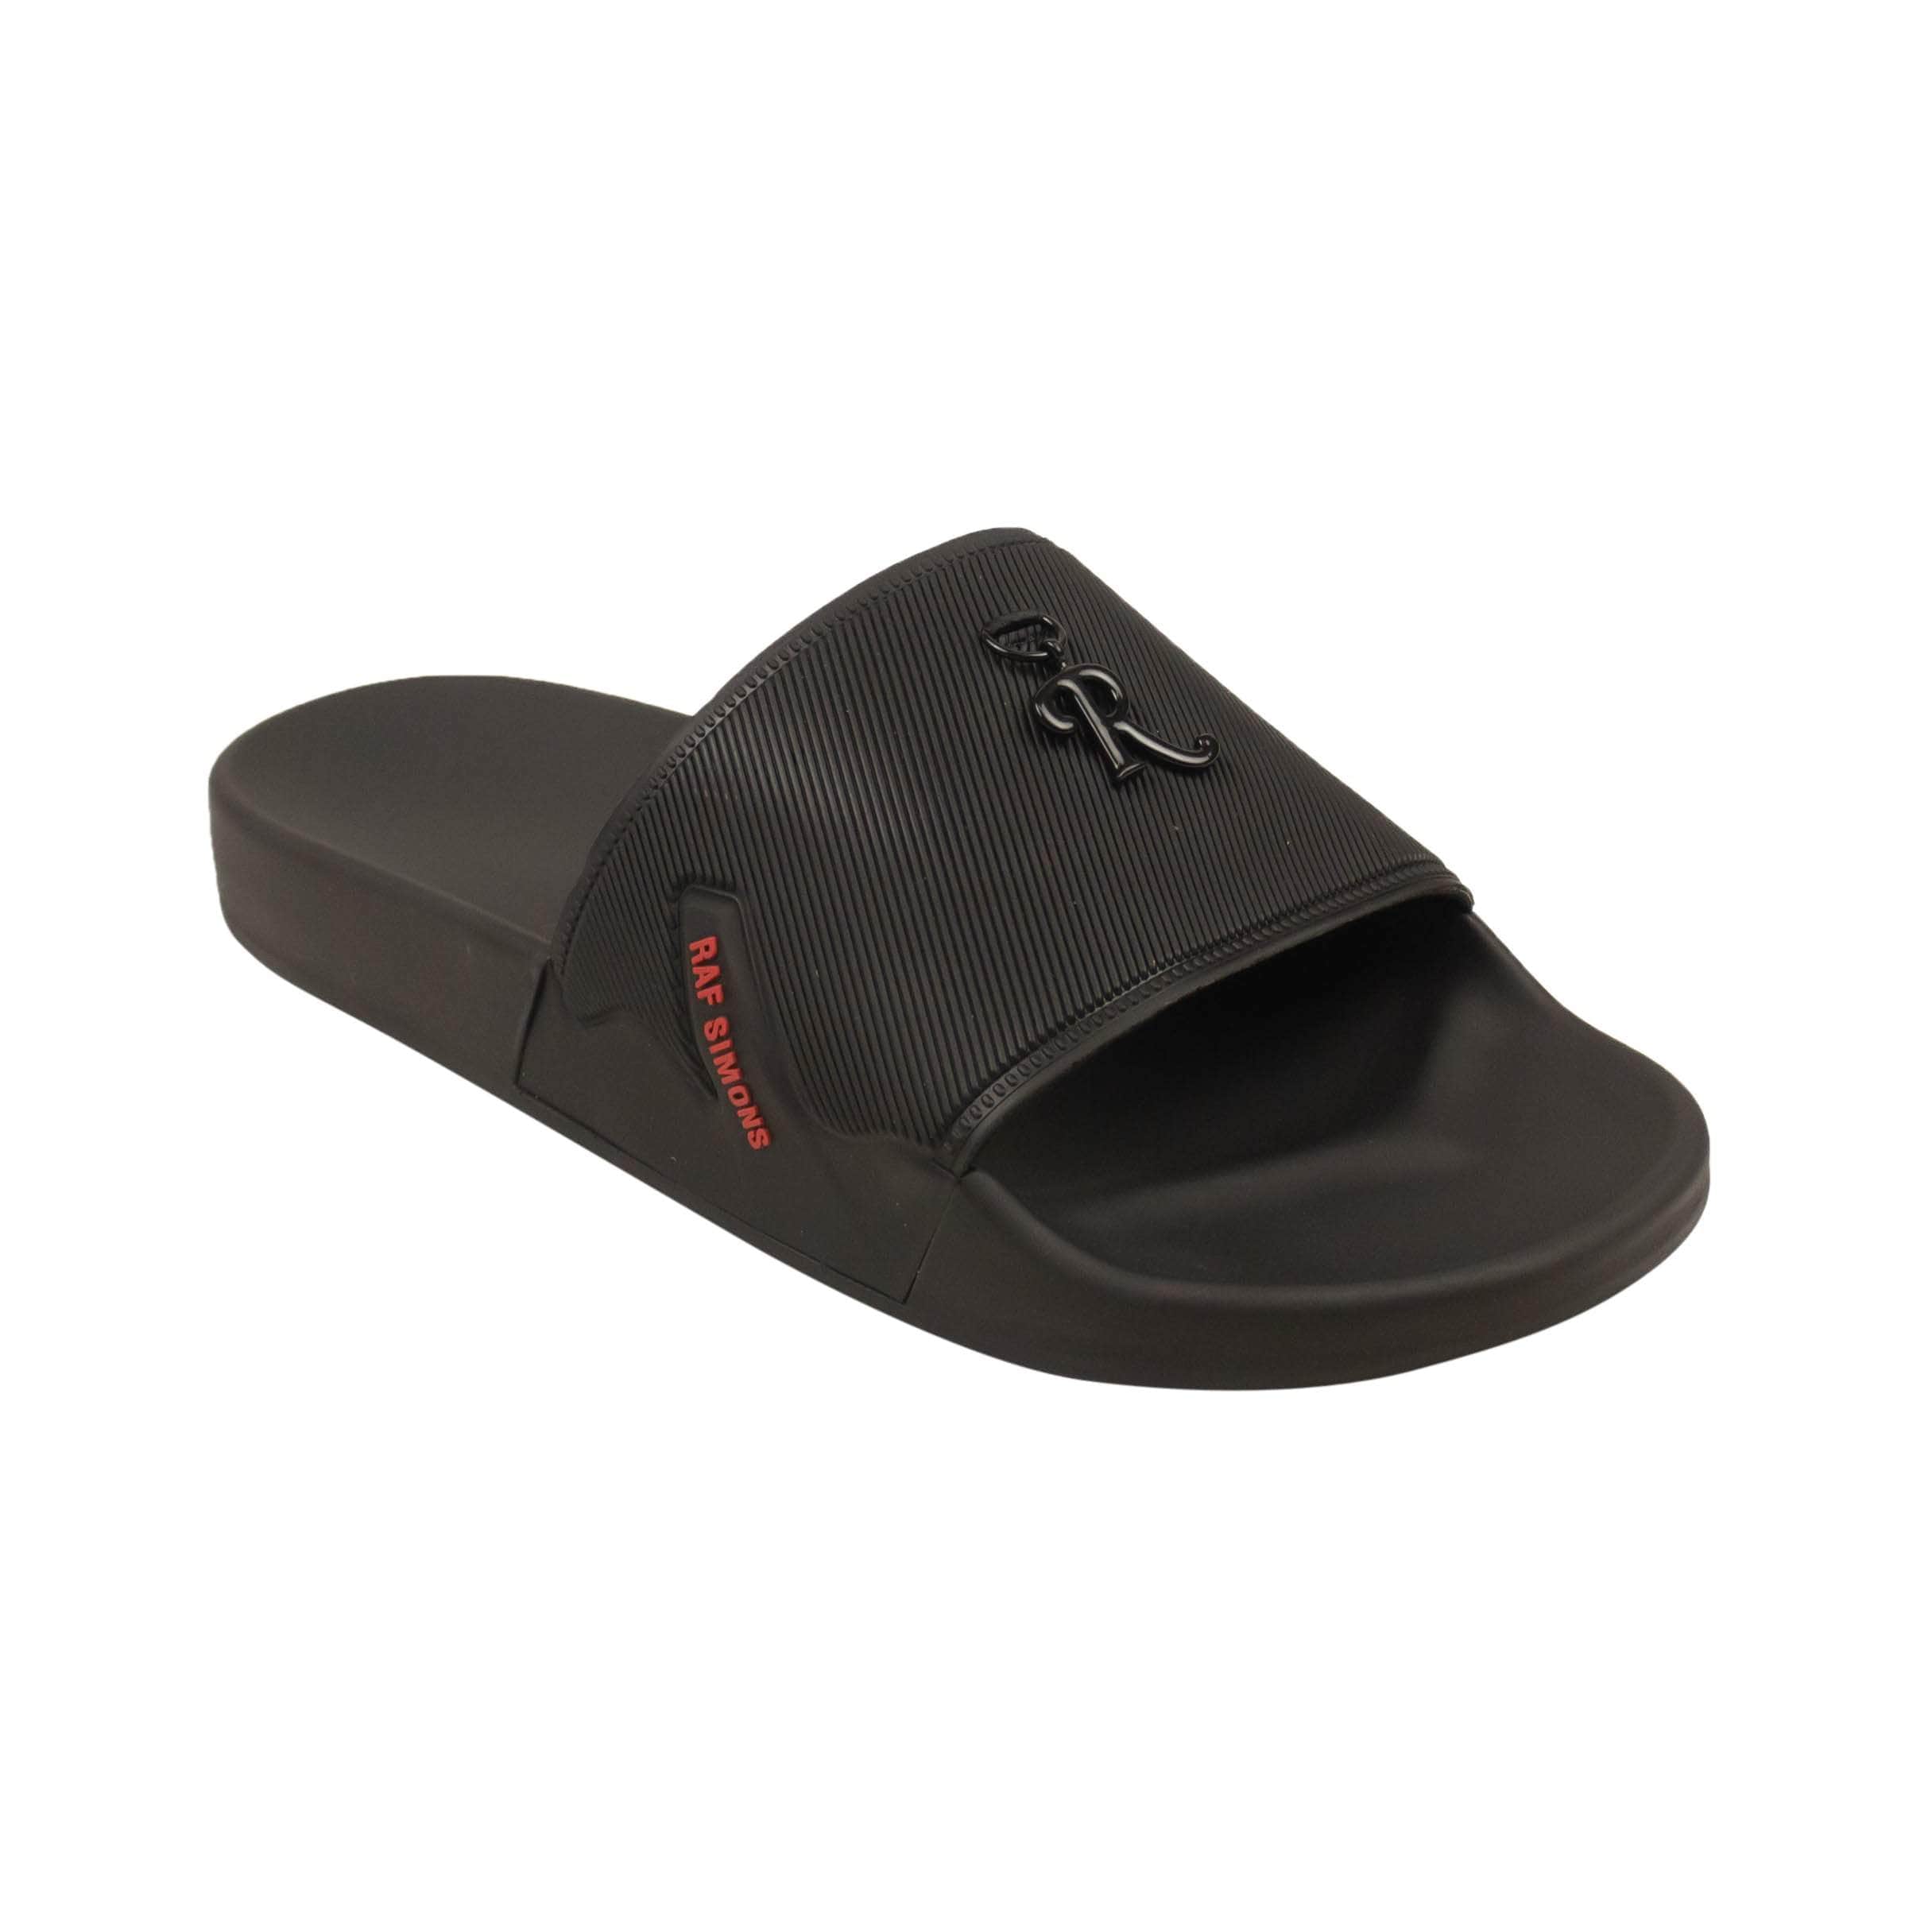 Raf Simons channelenable-all, chicmi, couponcollection, gender-mens, main-shoes, mens-shoes, mens-slides-slippers, MixedApparel, size-42, size-43, under-250 Black Astra Logo Slides